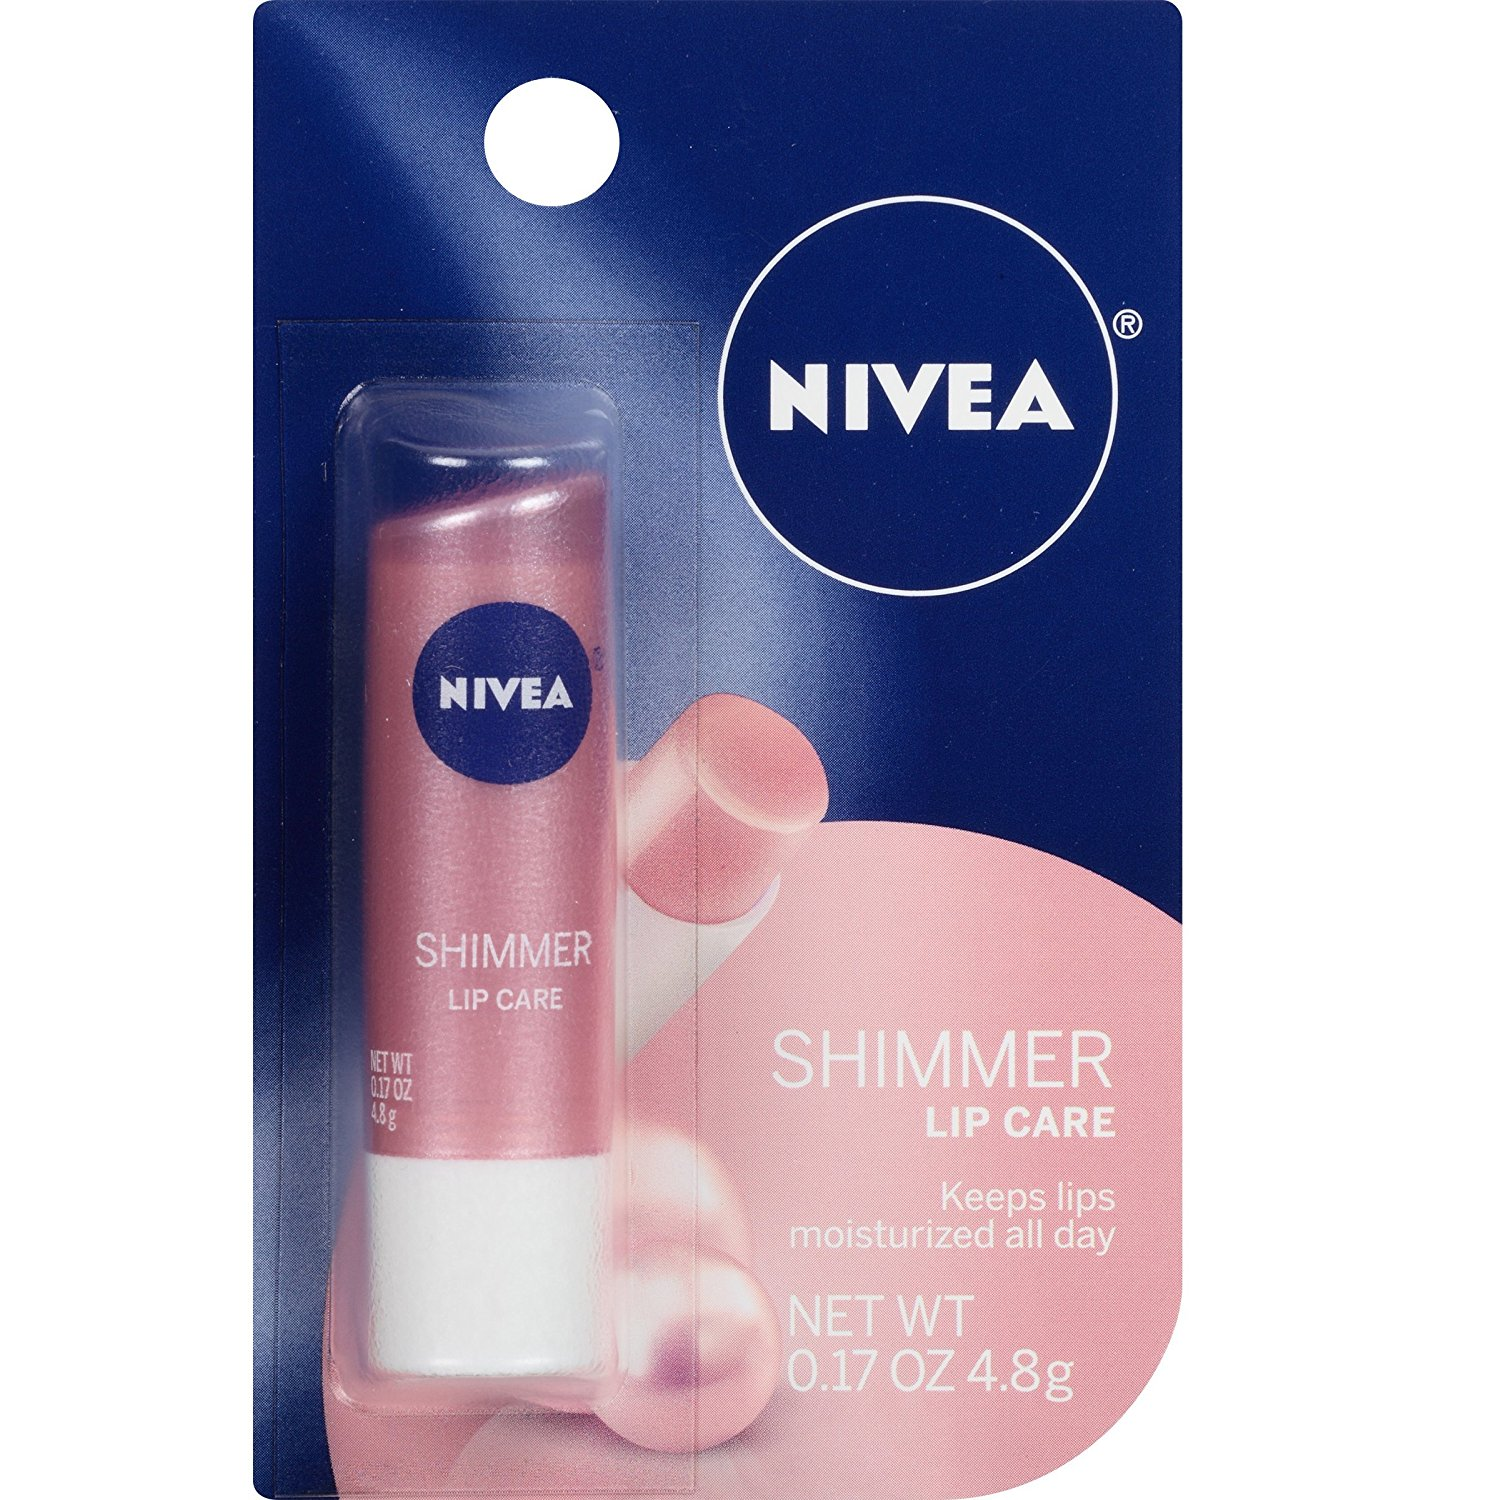 NIVEA Shimmer Lip Care Carded Pack (Pack of 6) Only $6.37 Shipped!